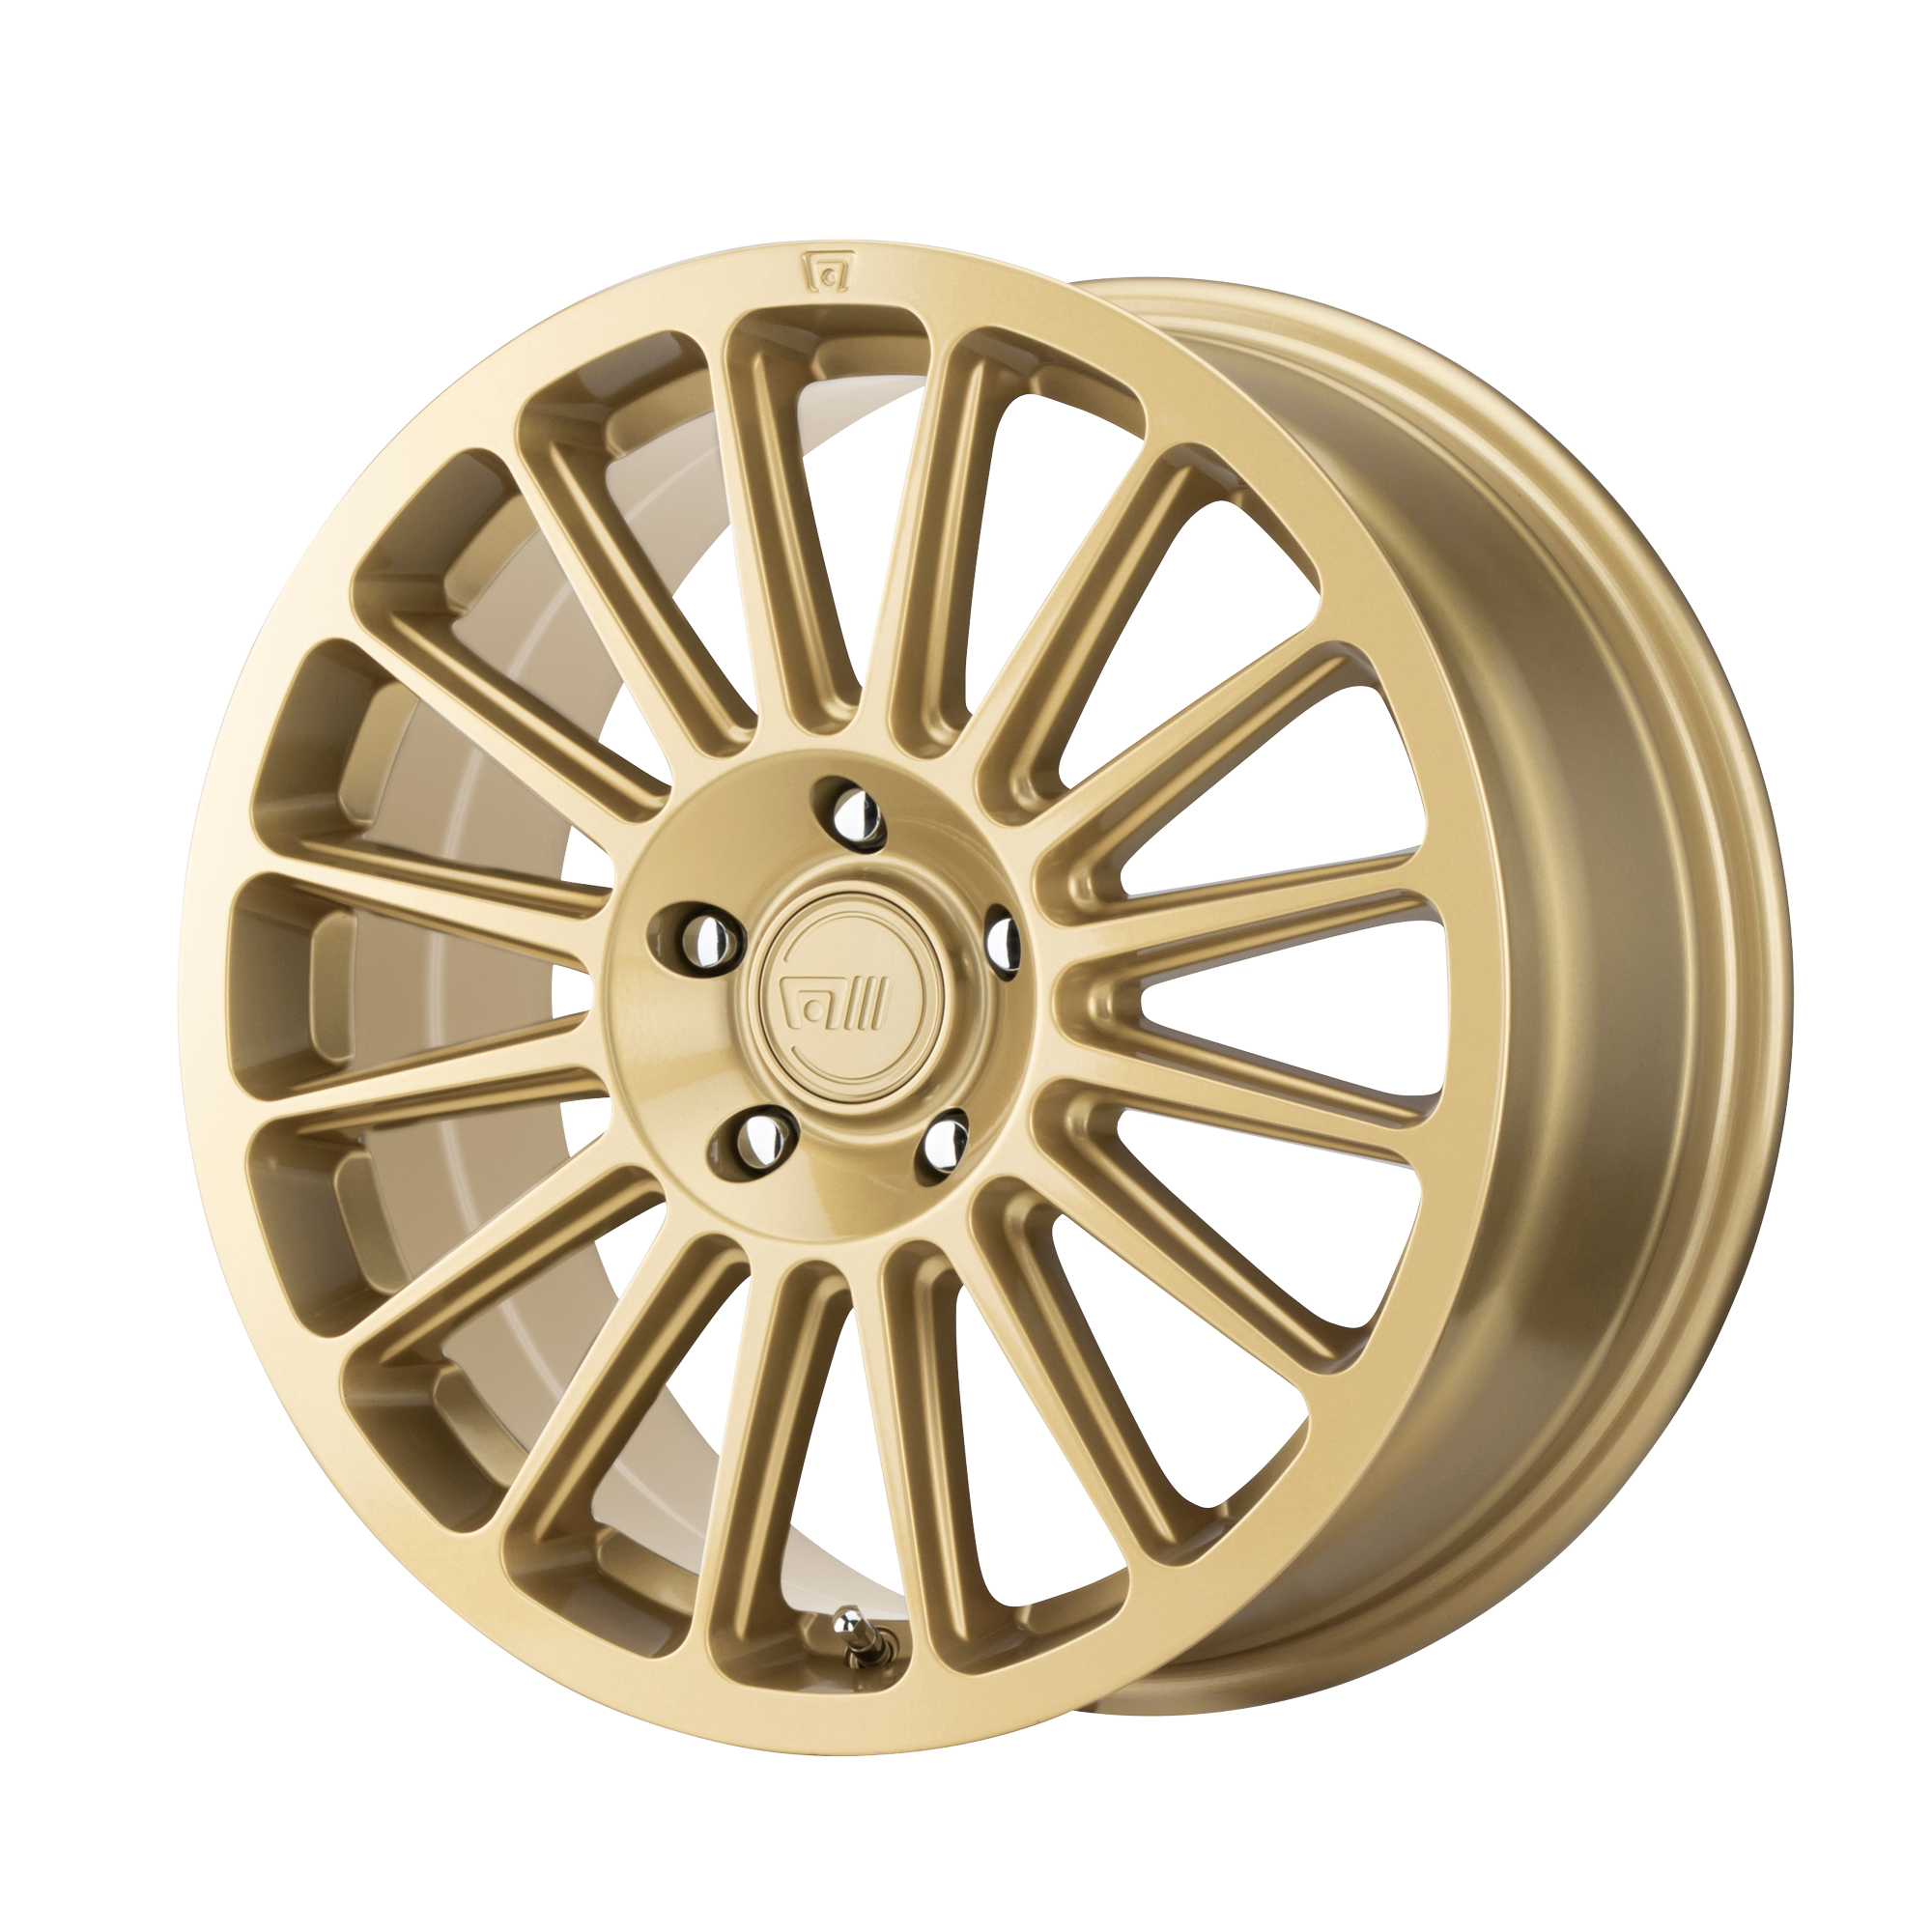 MR141 17x7.5 5x100.00 RALLY GOLD (40 mm) - Tires and Engine Performance